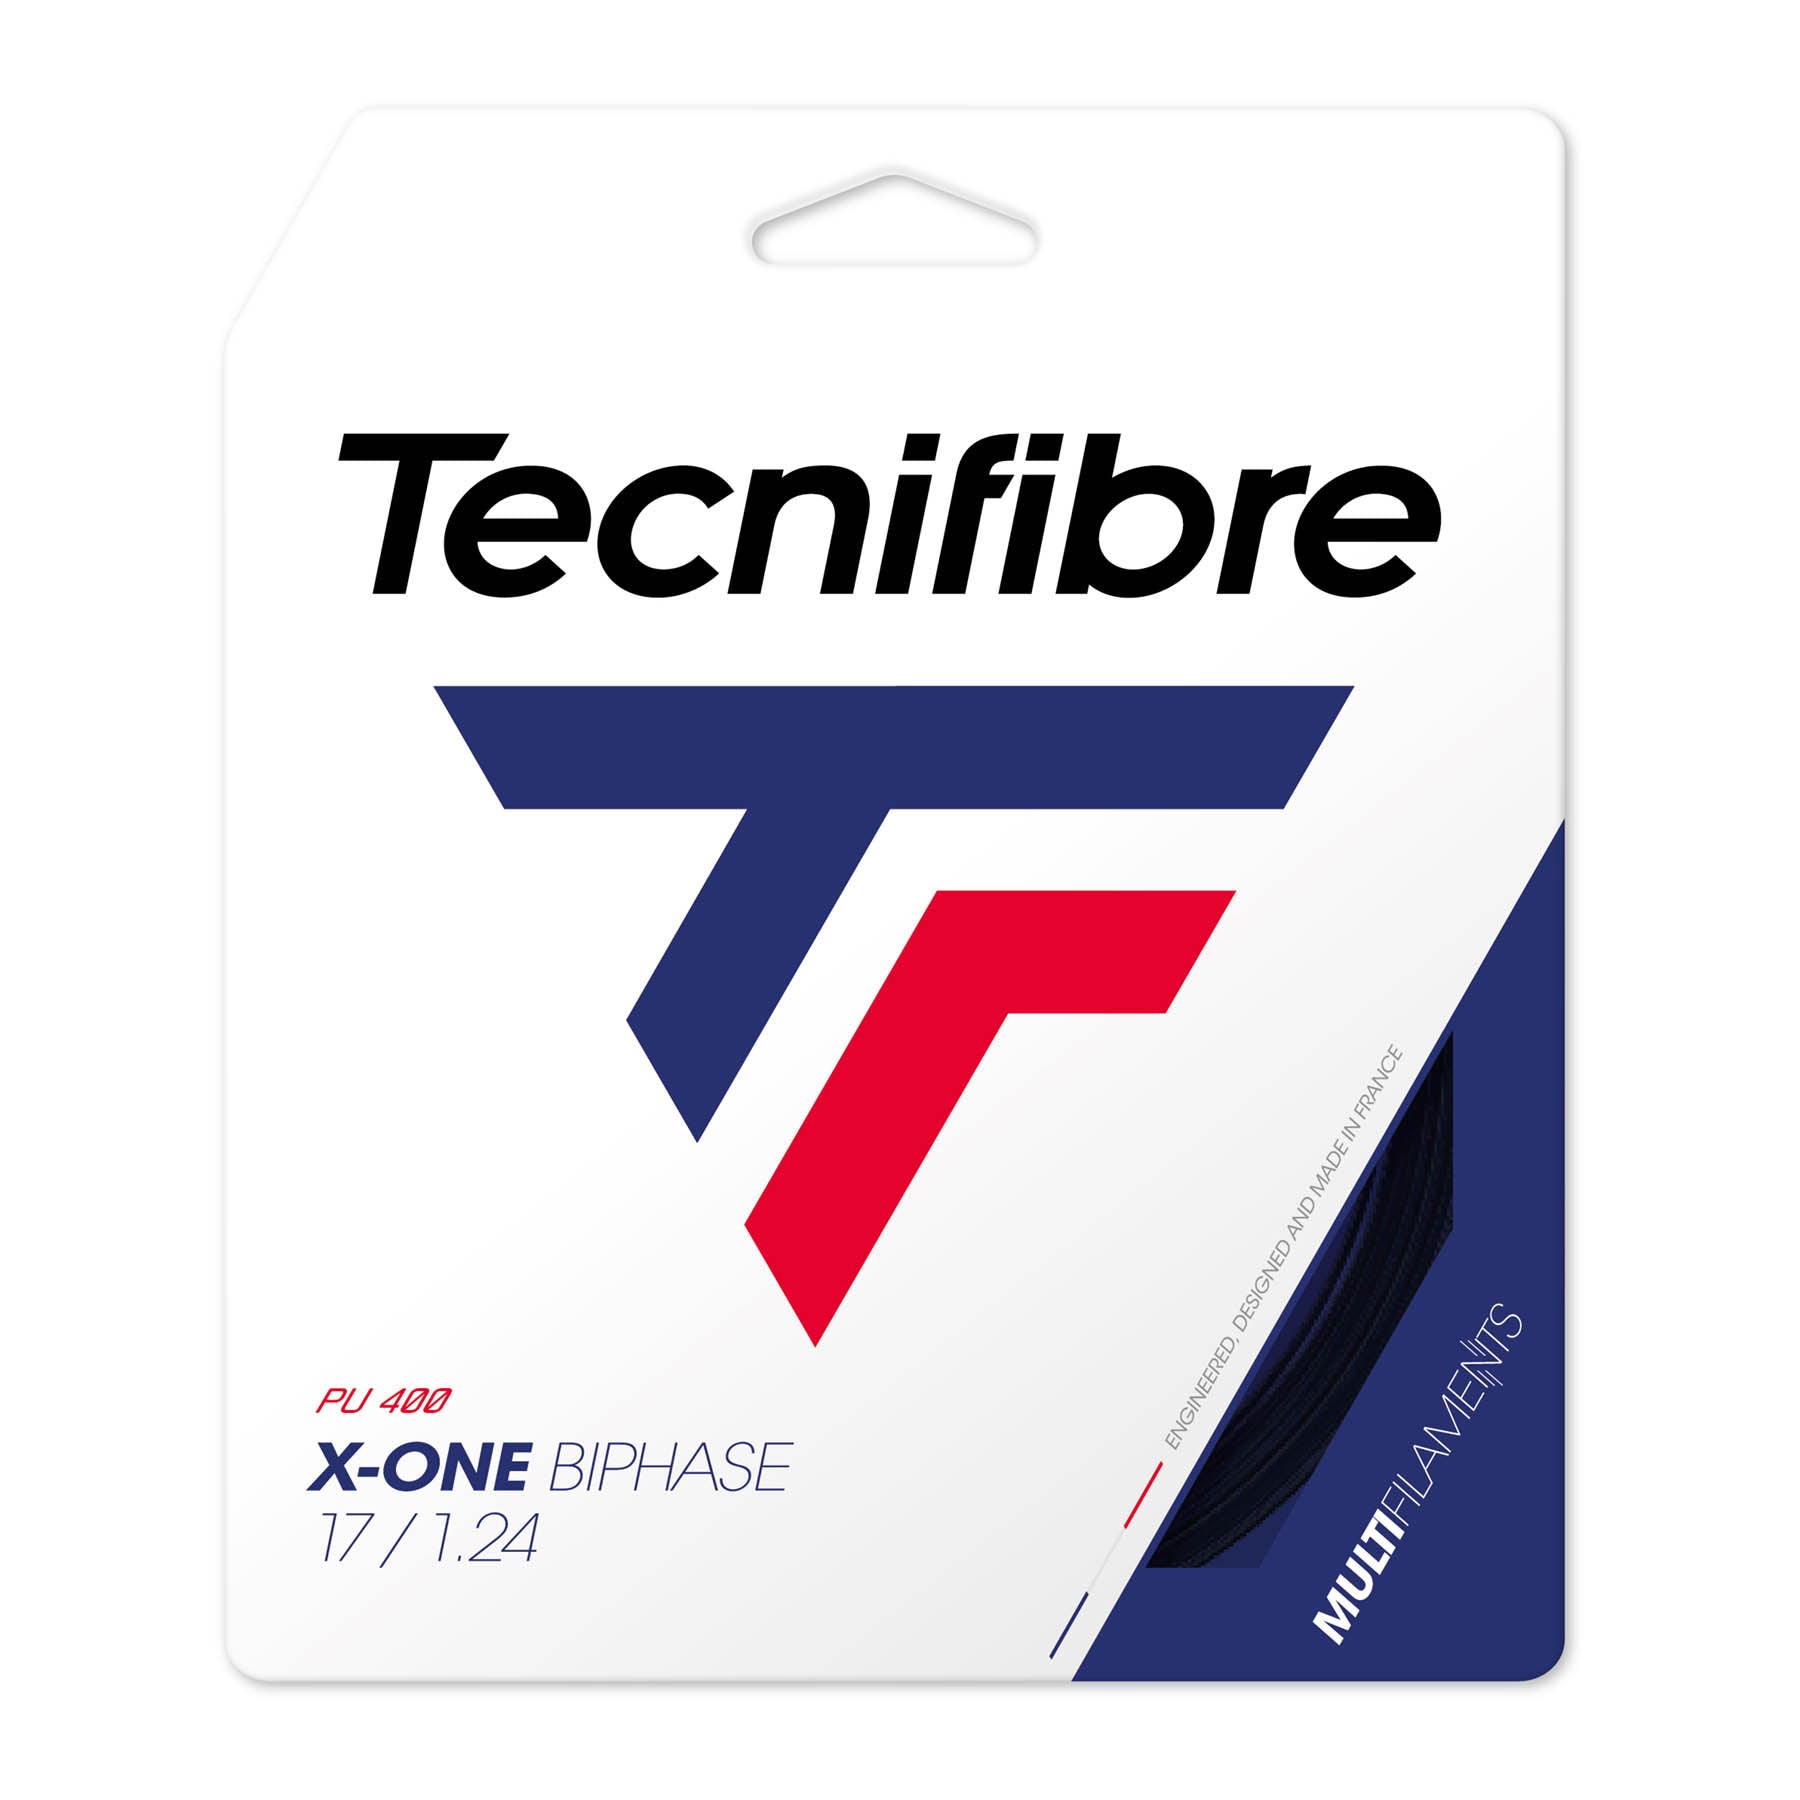 Tecnifibre X-One Biphase Tennis String Set from Sweatband.com